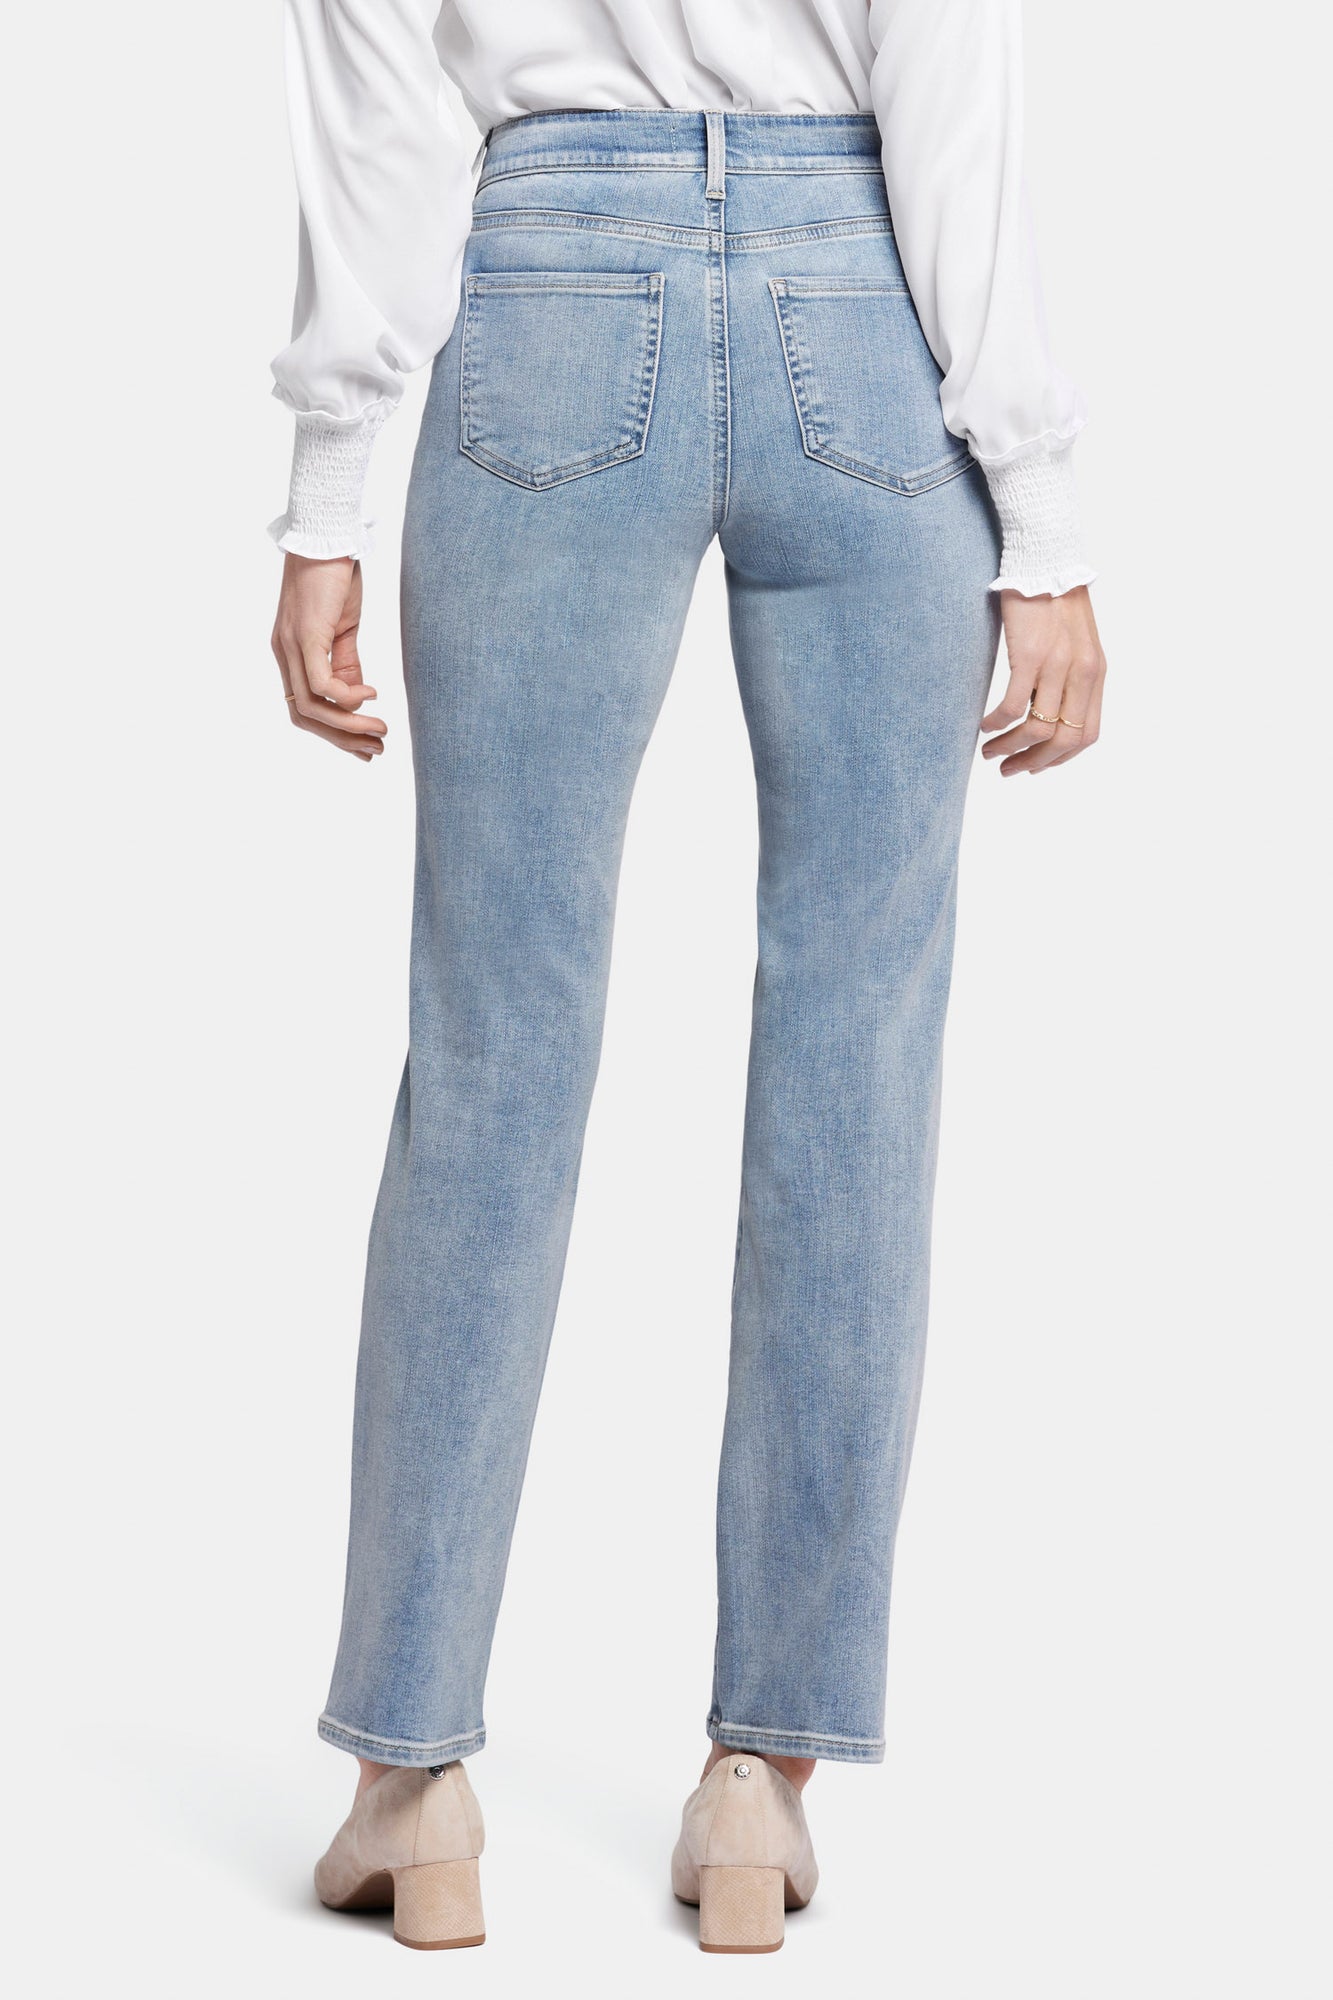 NYDJ Ellison Straight Jeans With High Rise - Haley